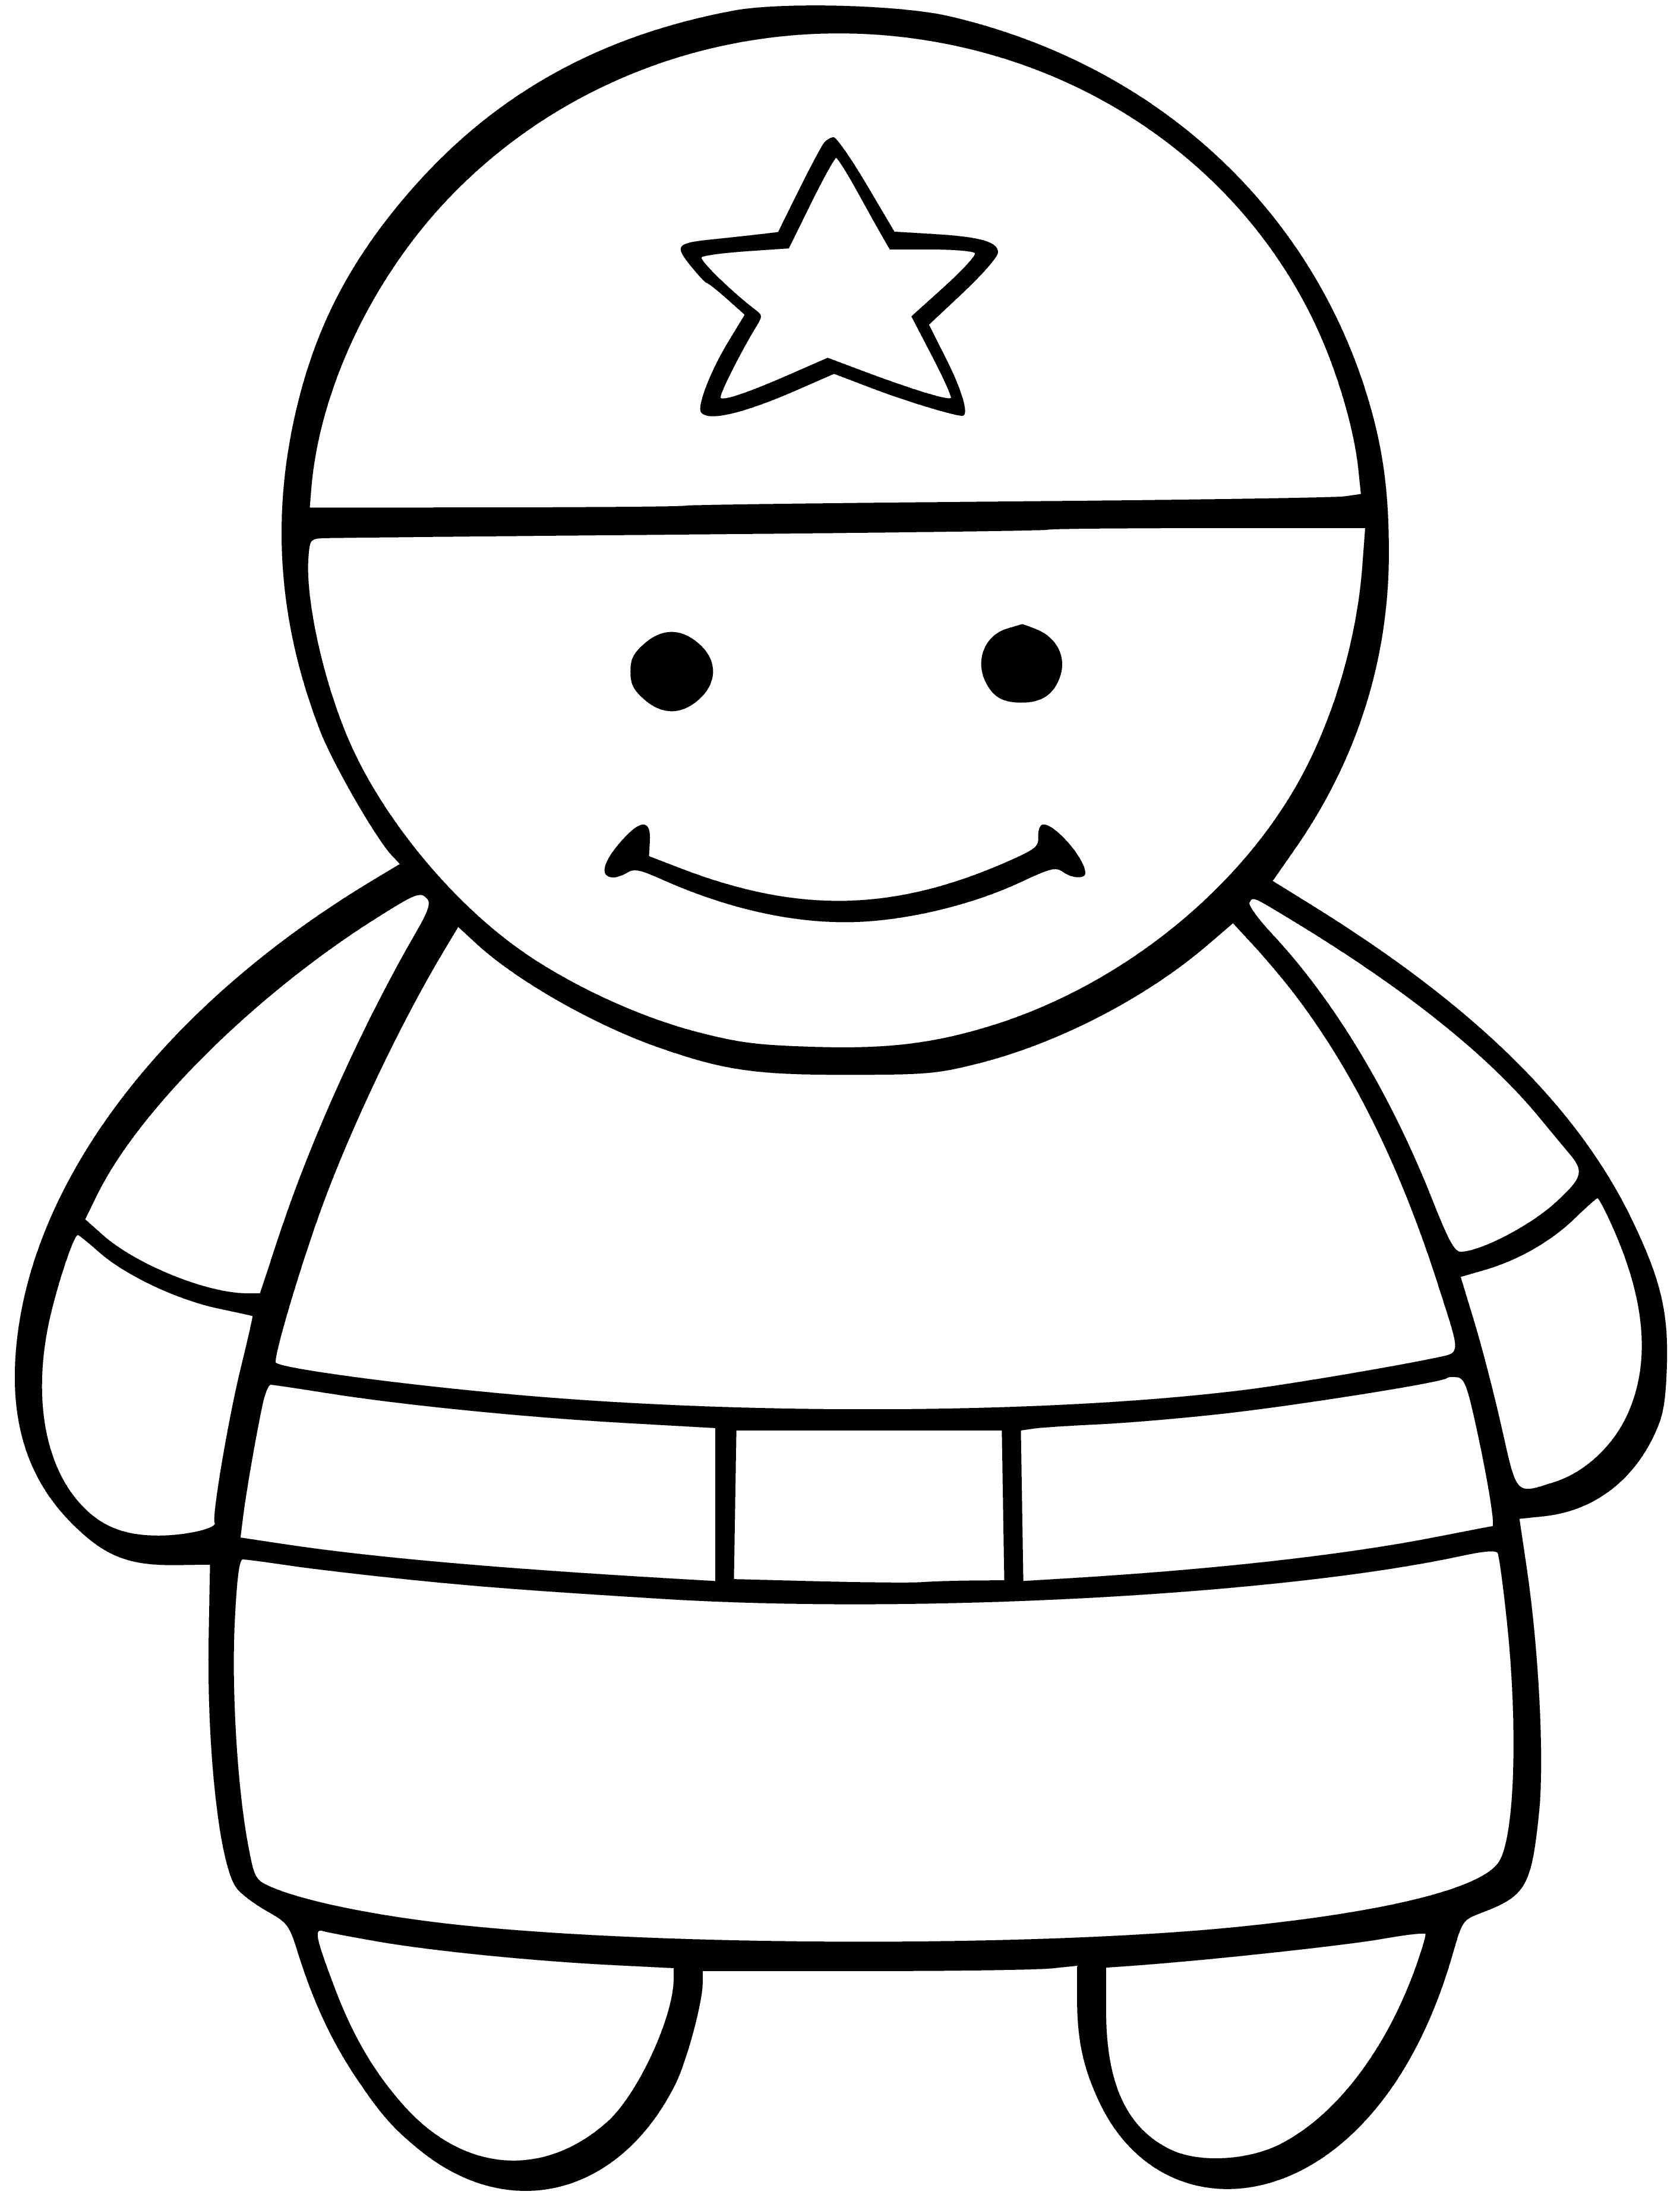 A soldier in a helmet coloring page